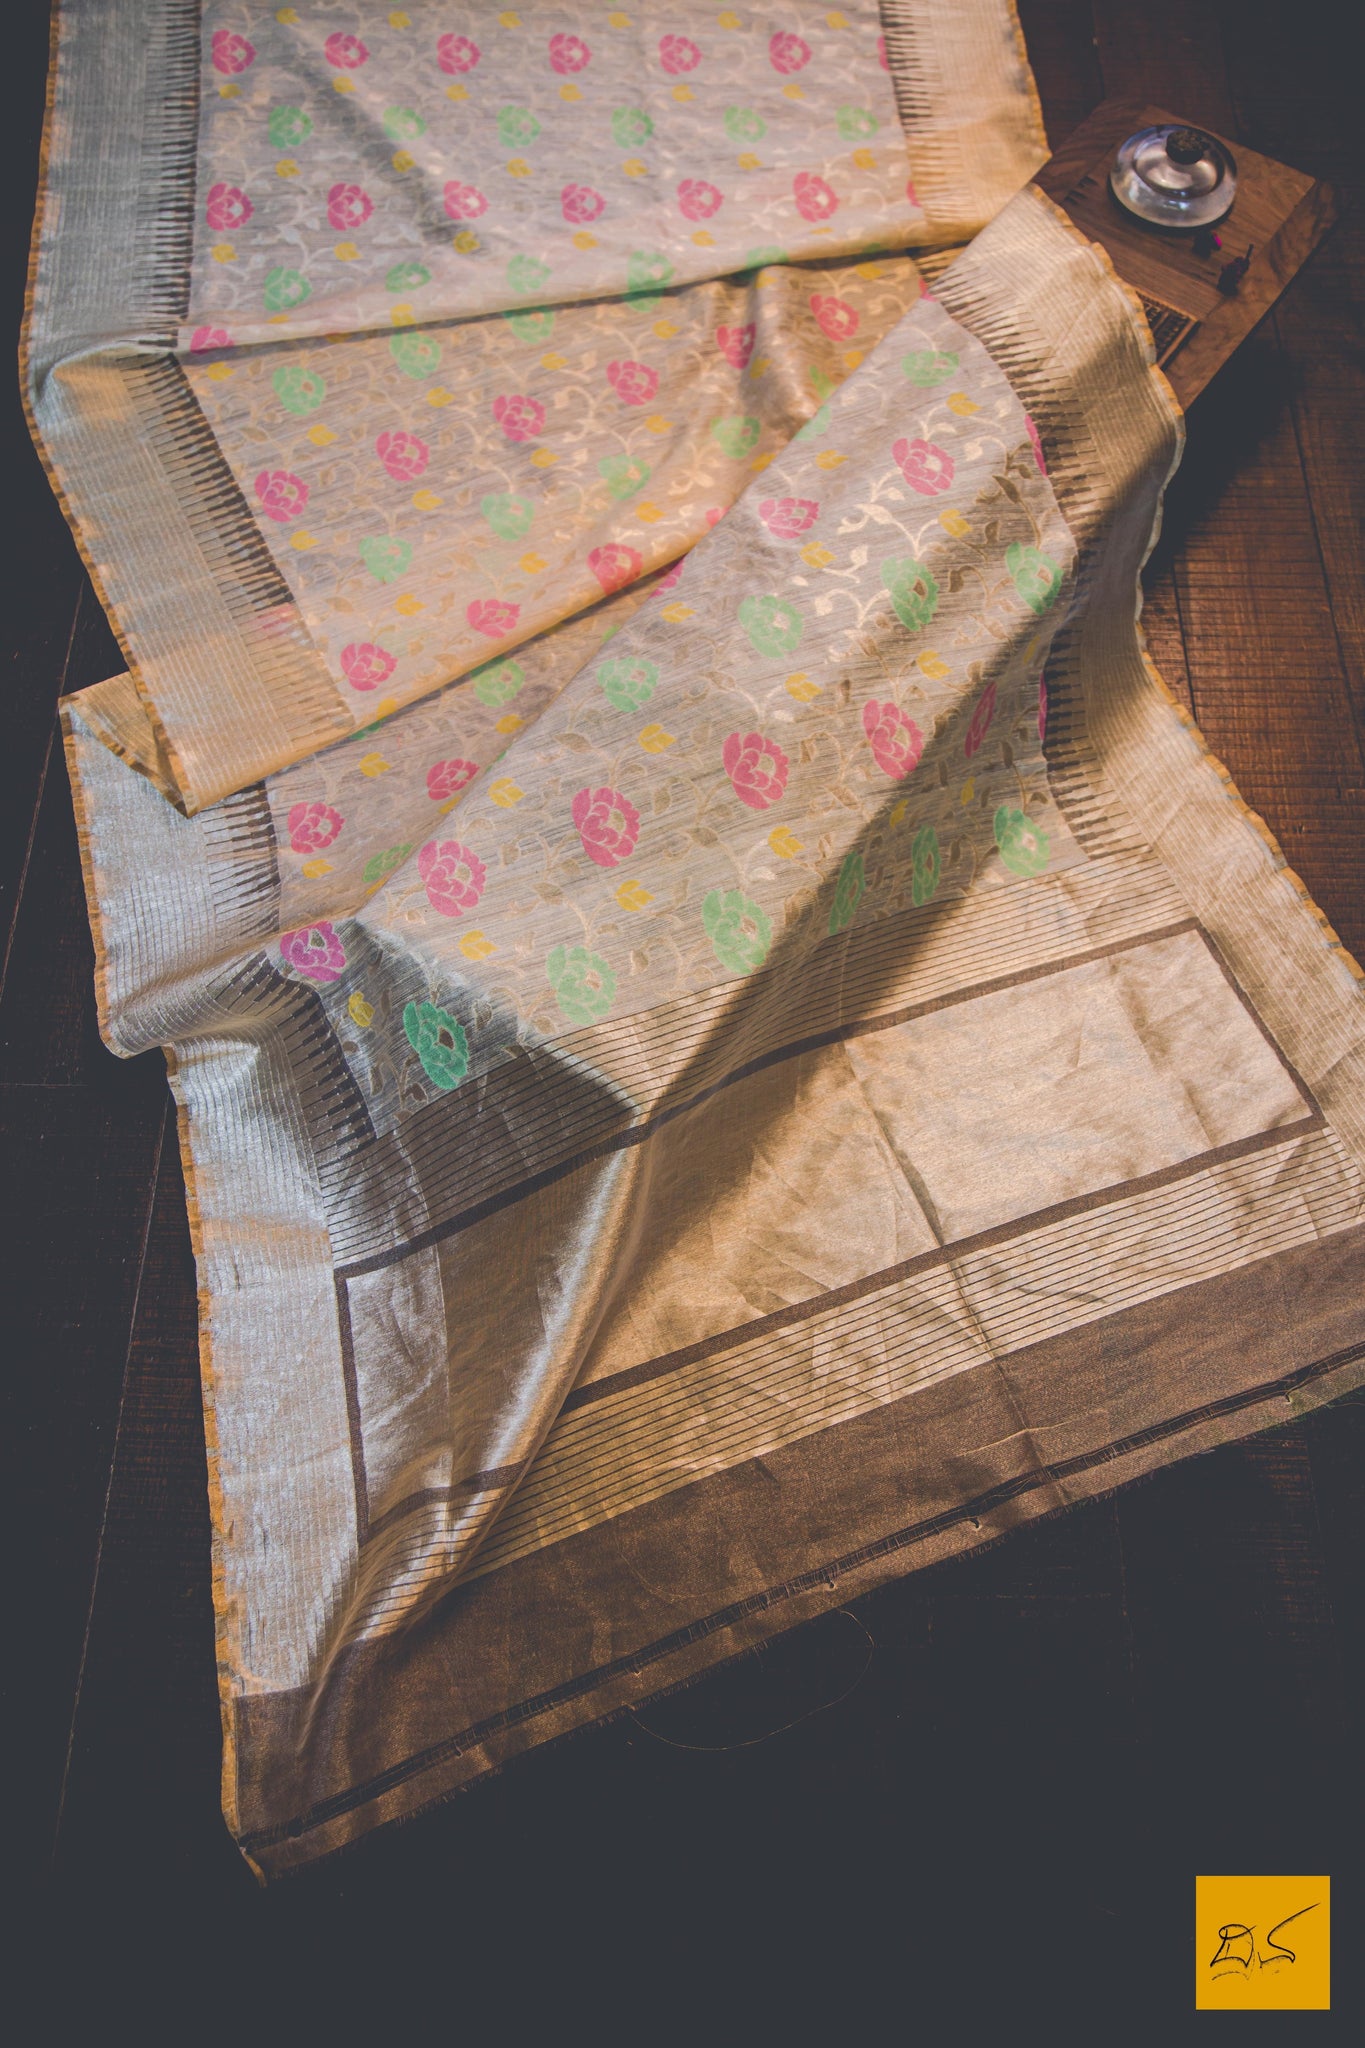 A beautiful tissue banarasi handwoven sari in dupion silk tilfi buttas in pink, green and yellow. The Beige body gives a soothing definition to the saree. Perfect for an informal or formal evening gathering. New trend of Banarasi Saree designs, Banarasi Saree for artists, art lovers, architects, saree lovers, Saree connoisseurs, musicians, dancers, doctors, Banarasi tissue dupion silk saree, indian saree images, latest sarees with price, only saree images, new Banarasi saree design.